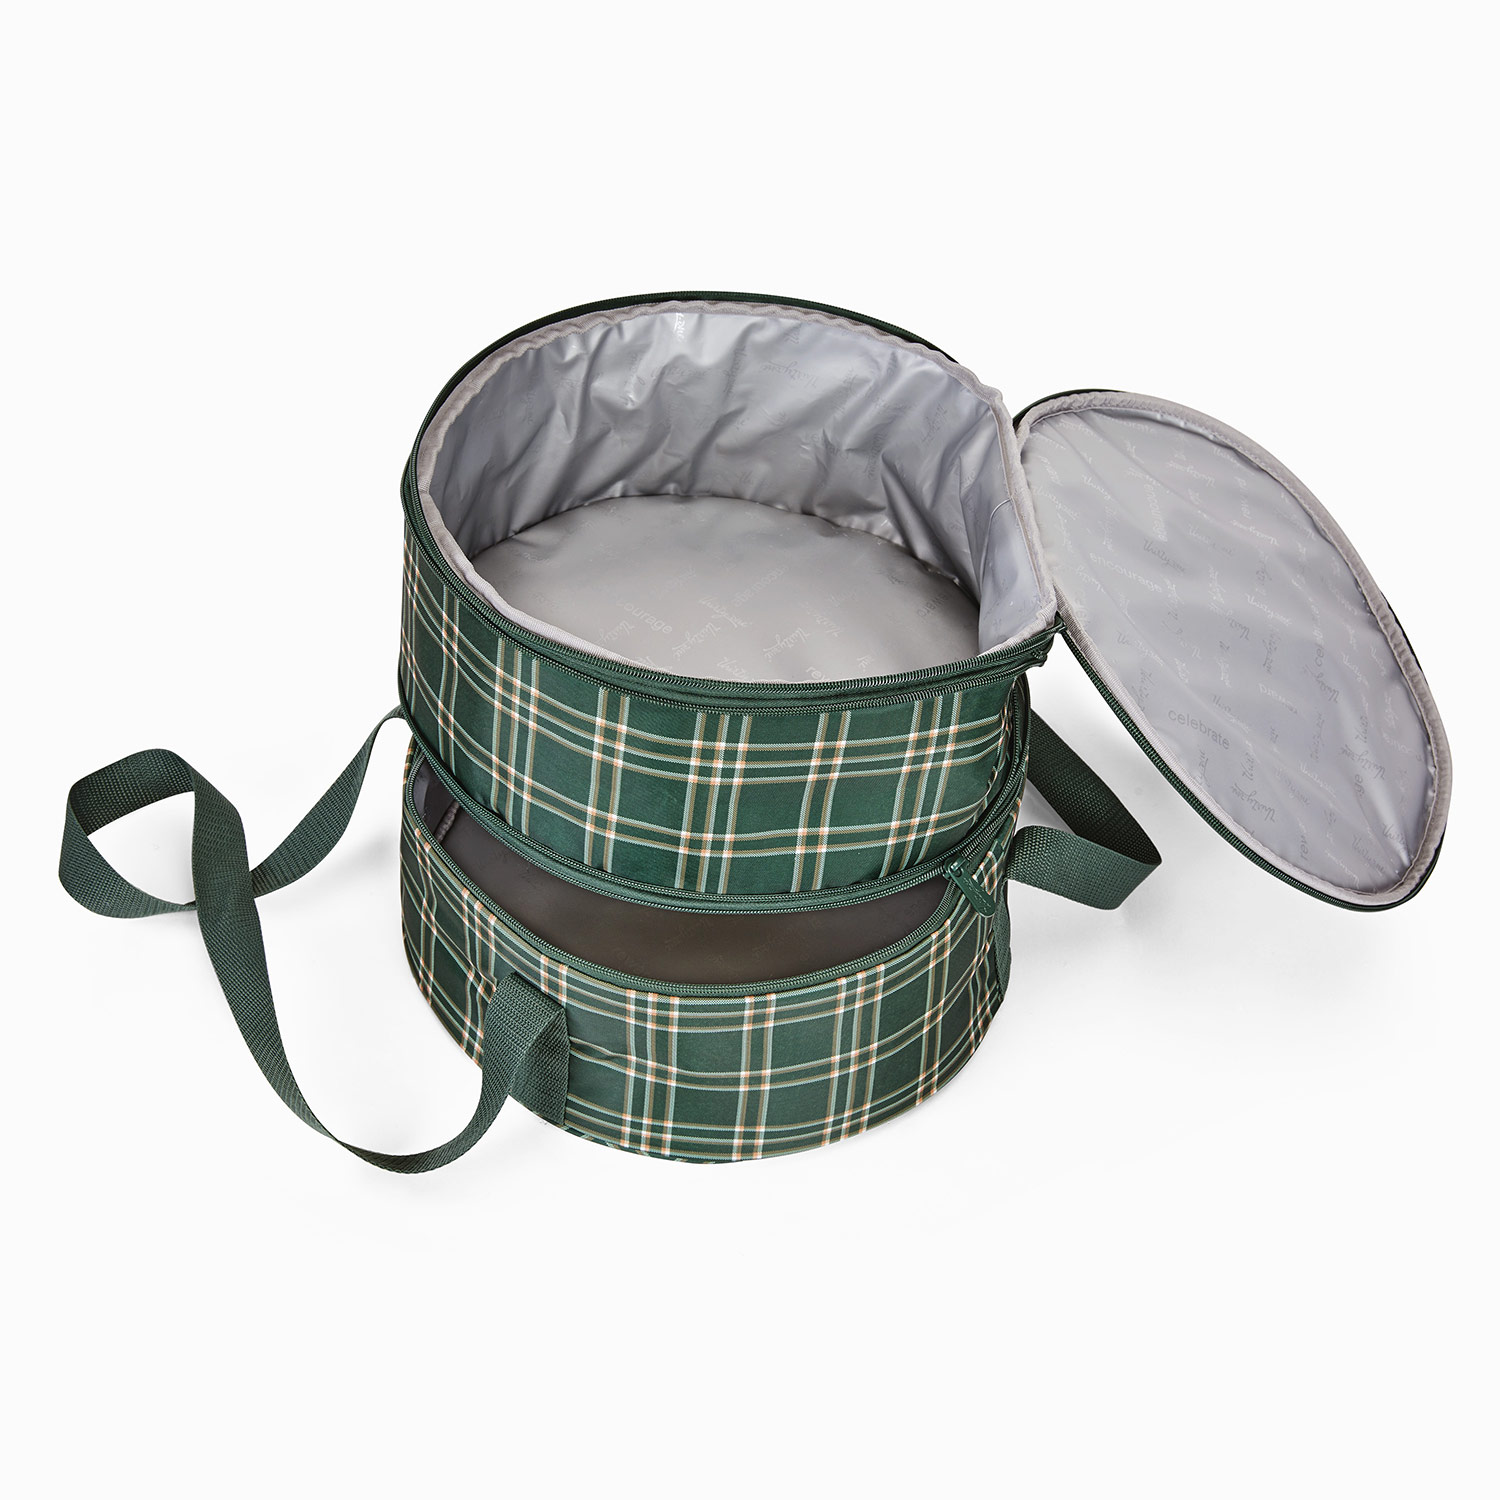 Evergreen Plaid - Expandable Insulated Cooler Bag - Thirty-One Gifts -  Affordable Purses, Totes & Bags